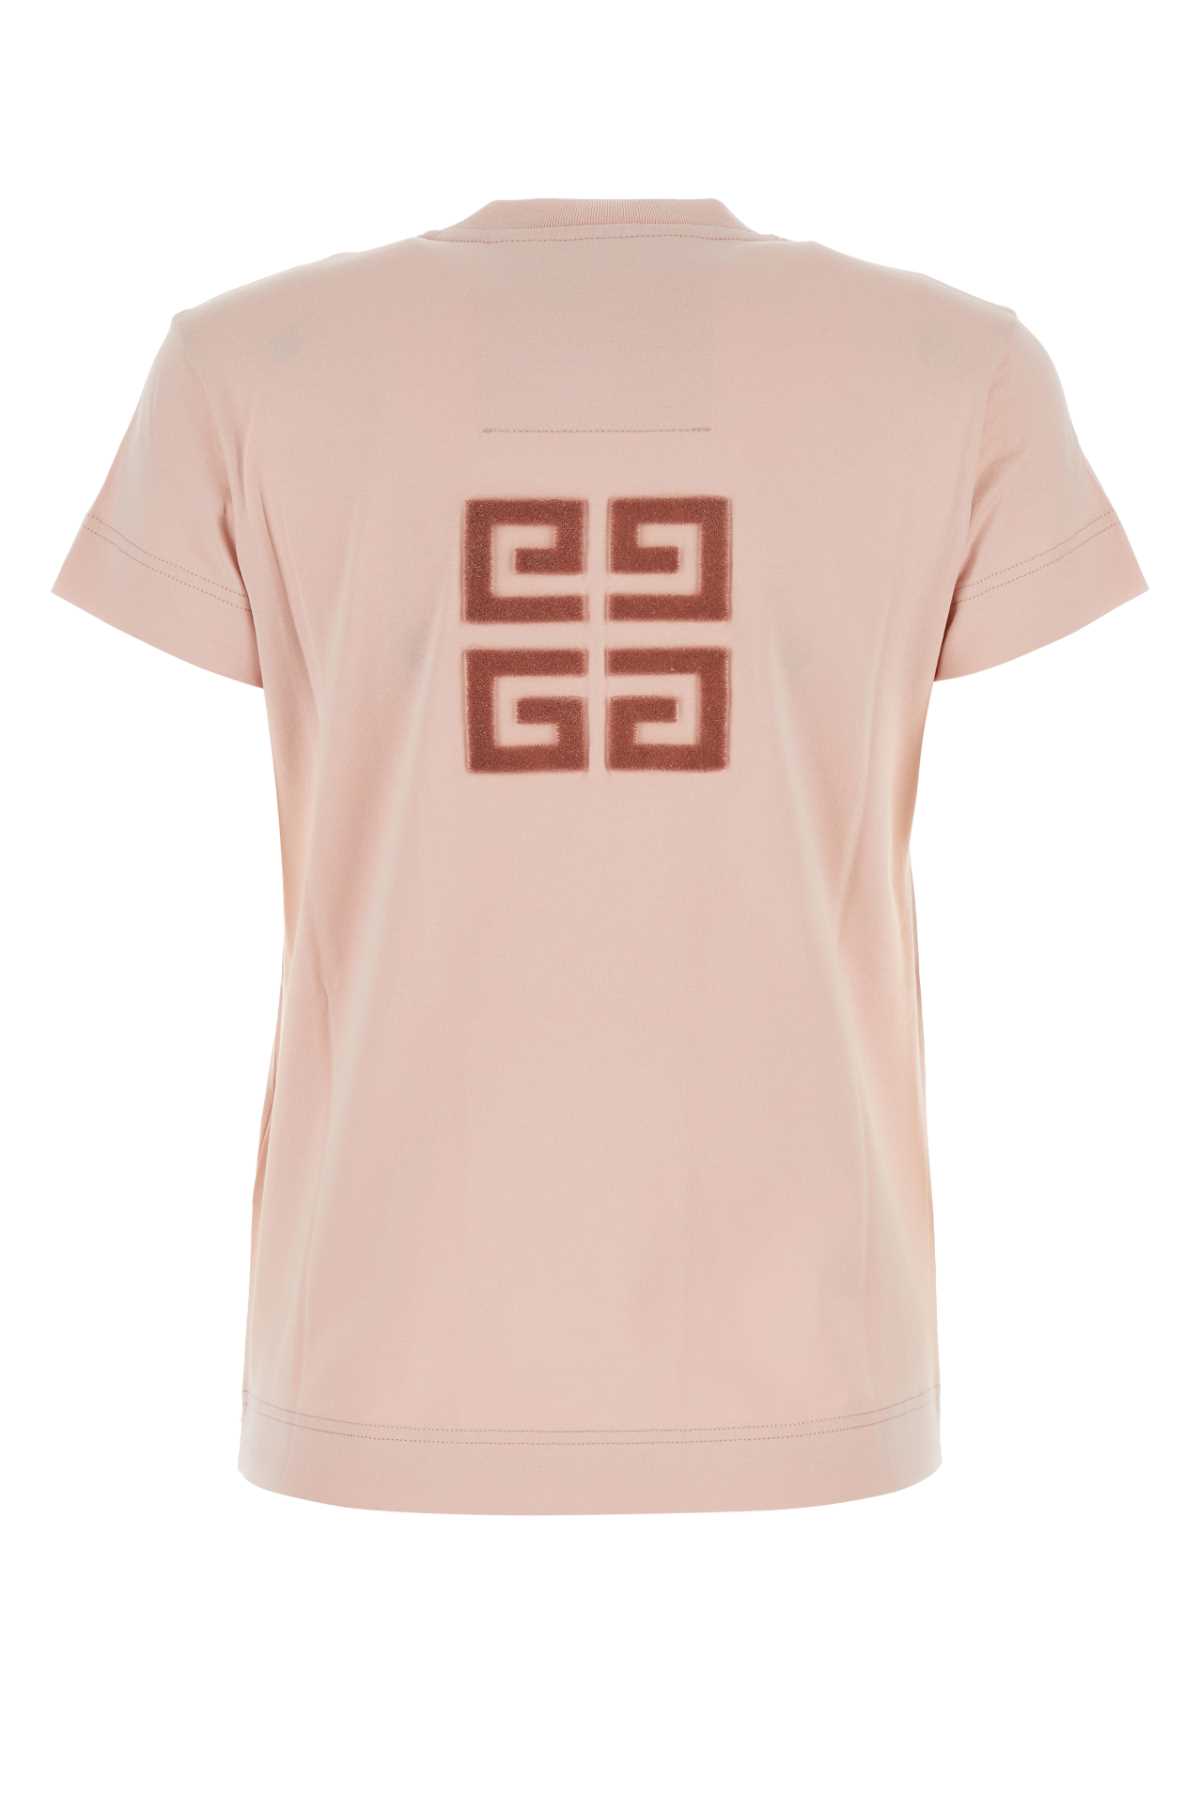 Givenchy Pink Cotton T-shirt In Blushpink